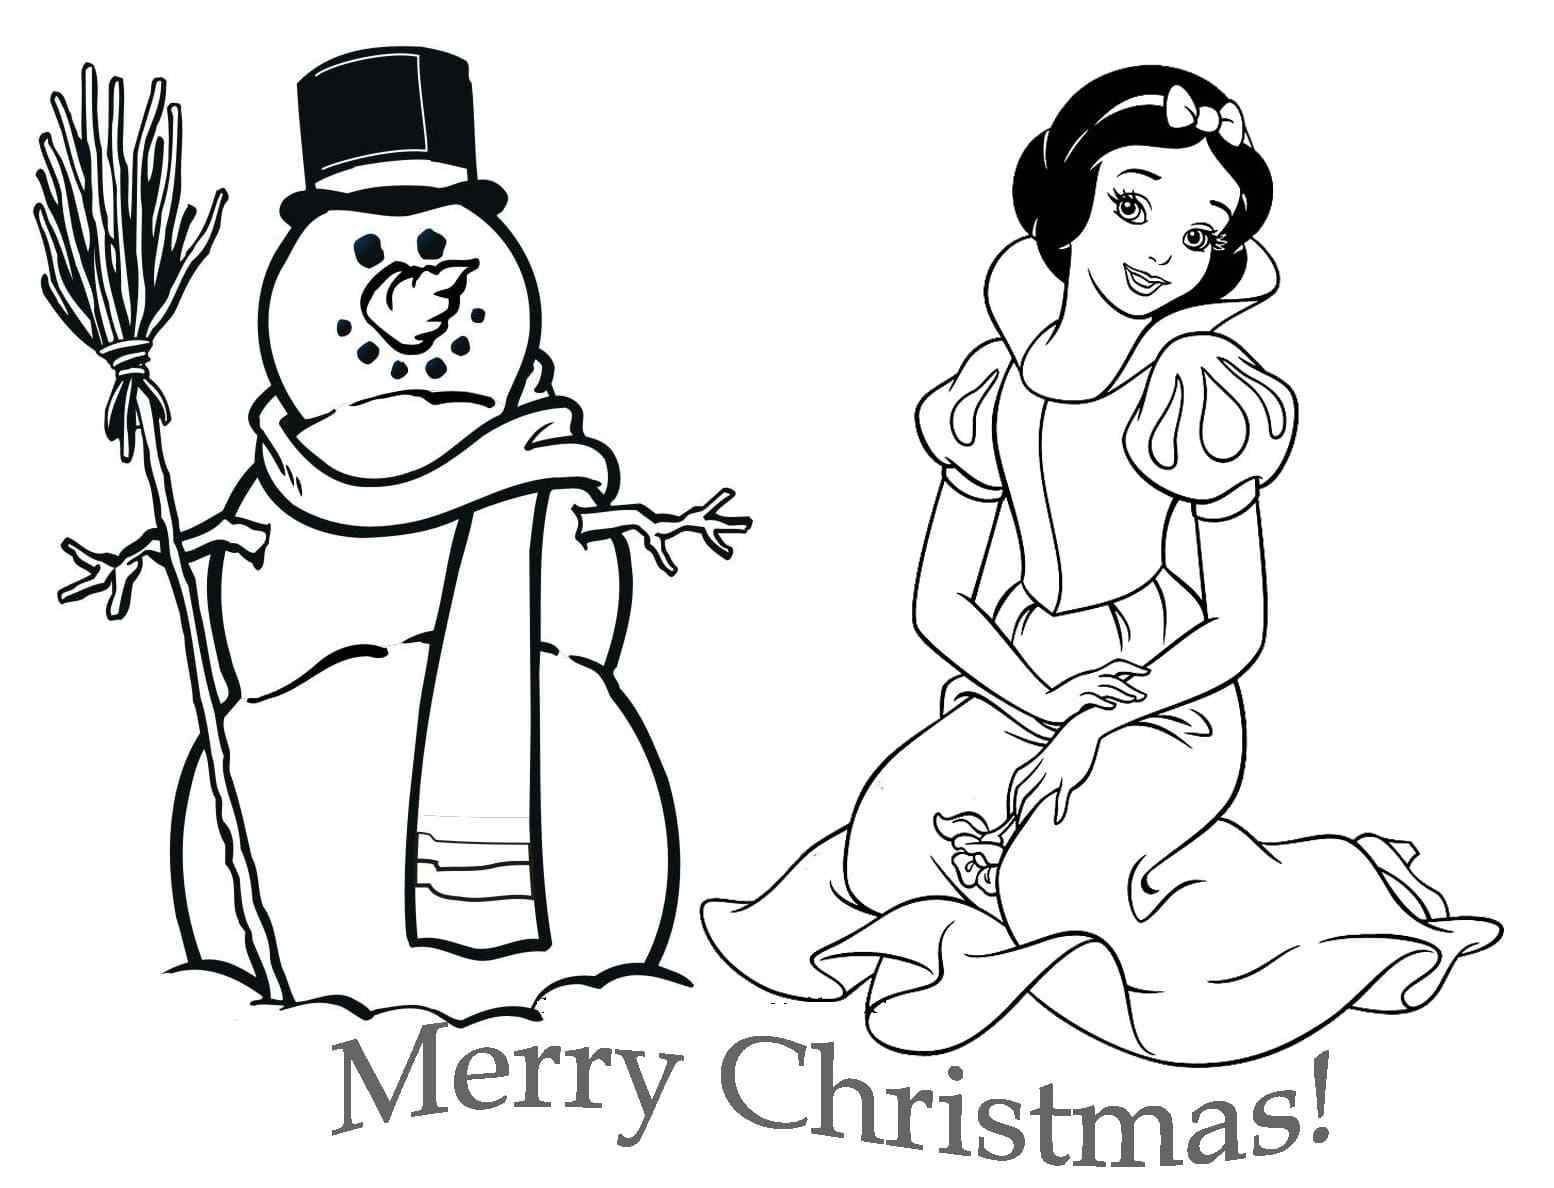 The Snowman Creates A Festive Mood Coloring Page